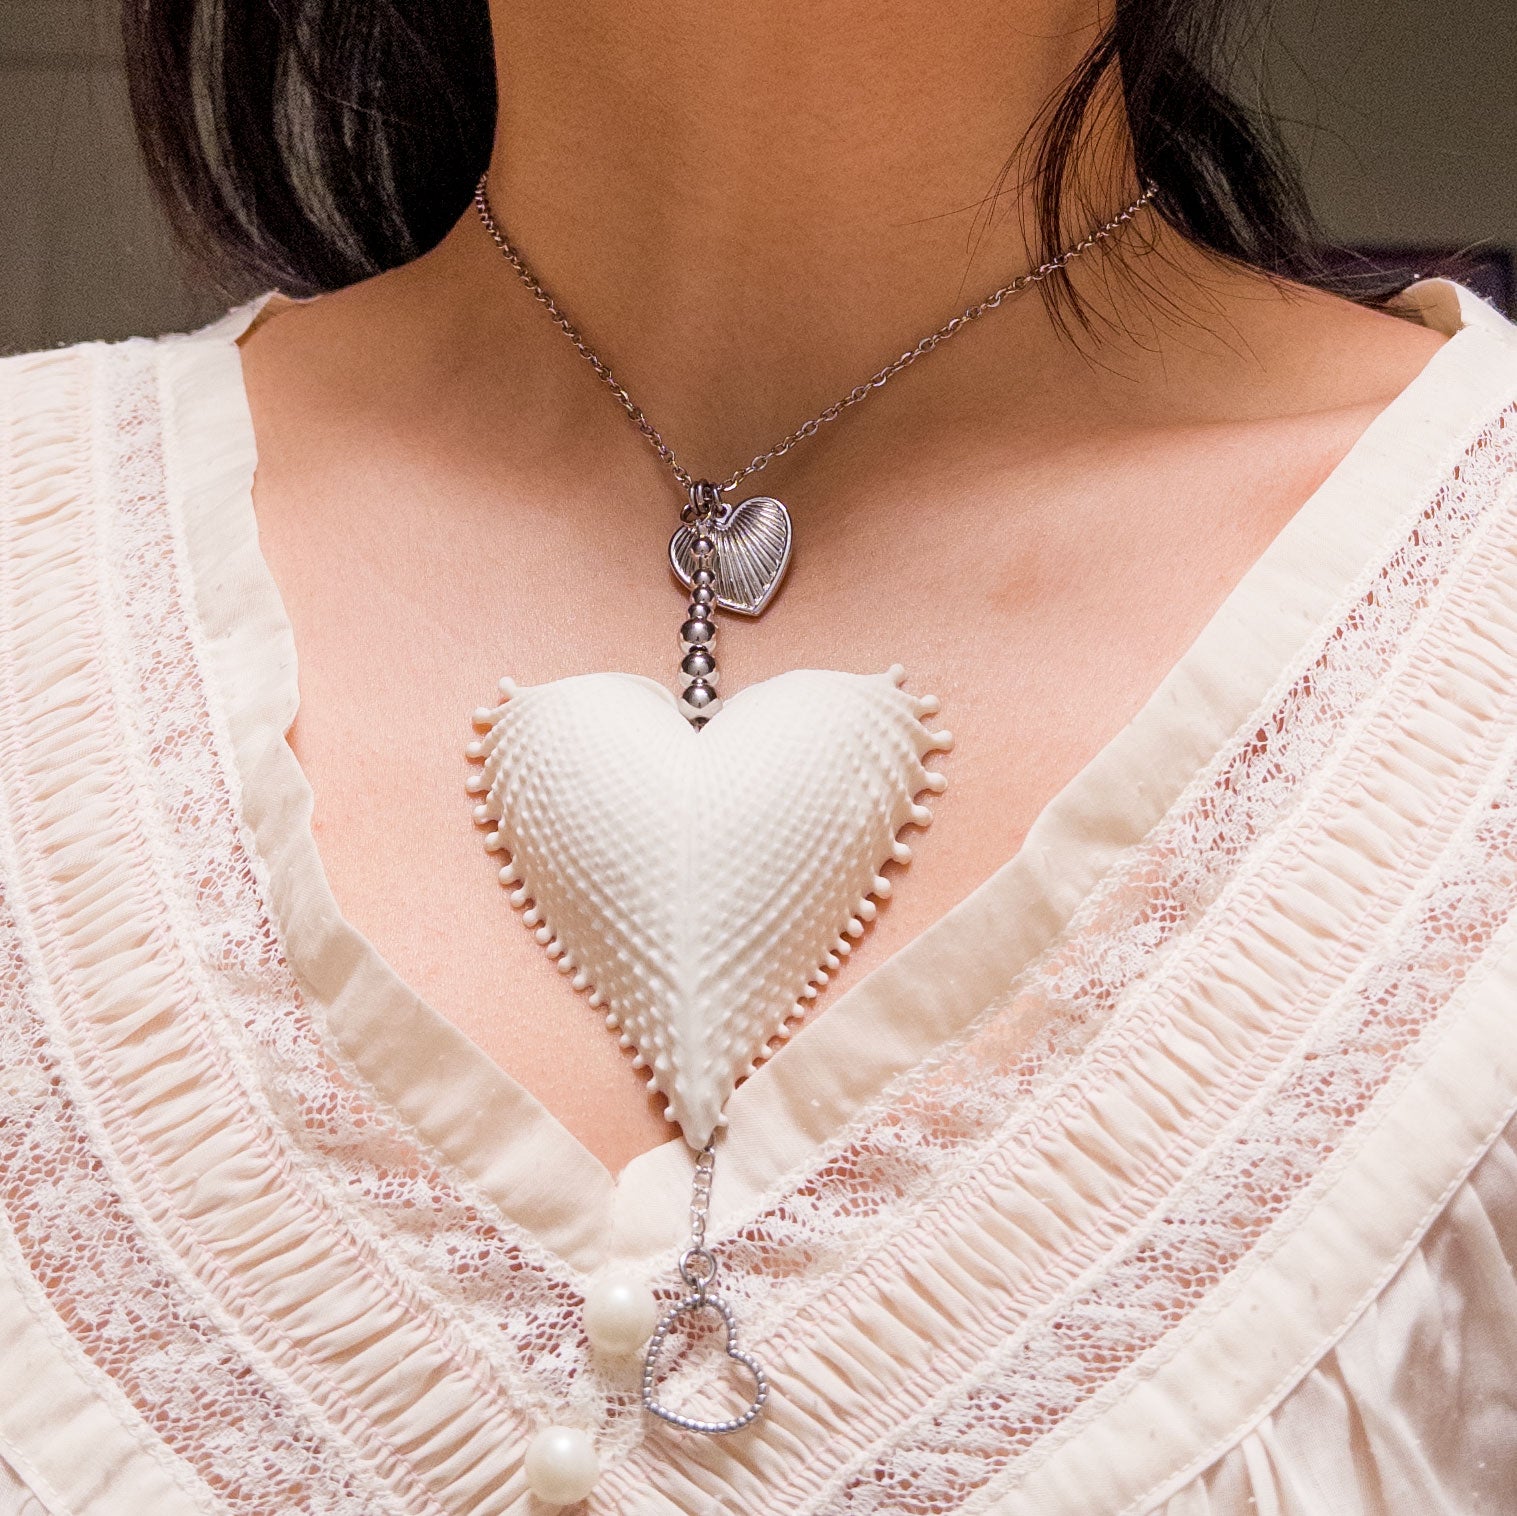 Multi charms necklace featuring a large vintage scallop heart, stainless steel heart charms, on a stainless steel chain.